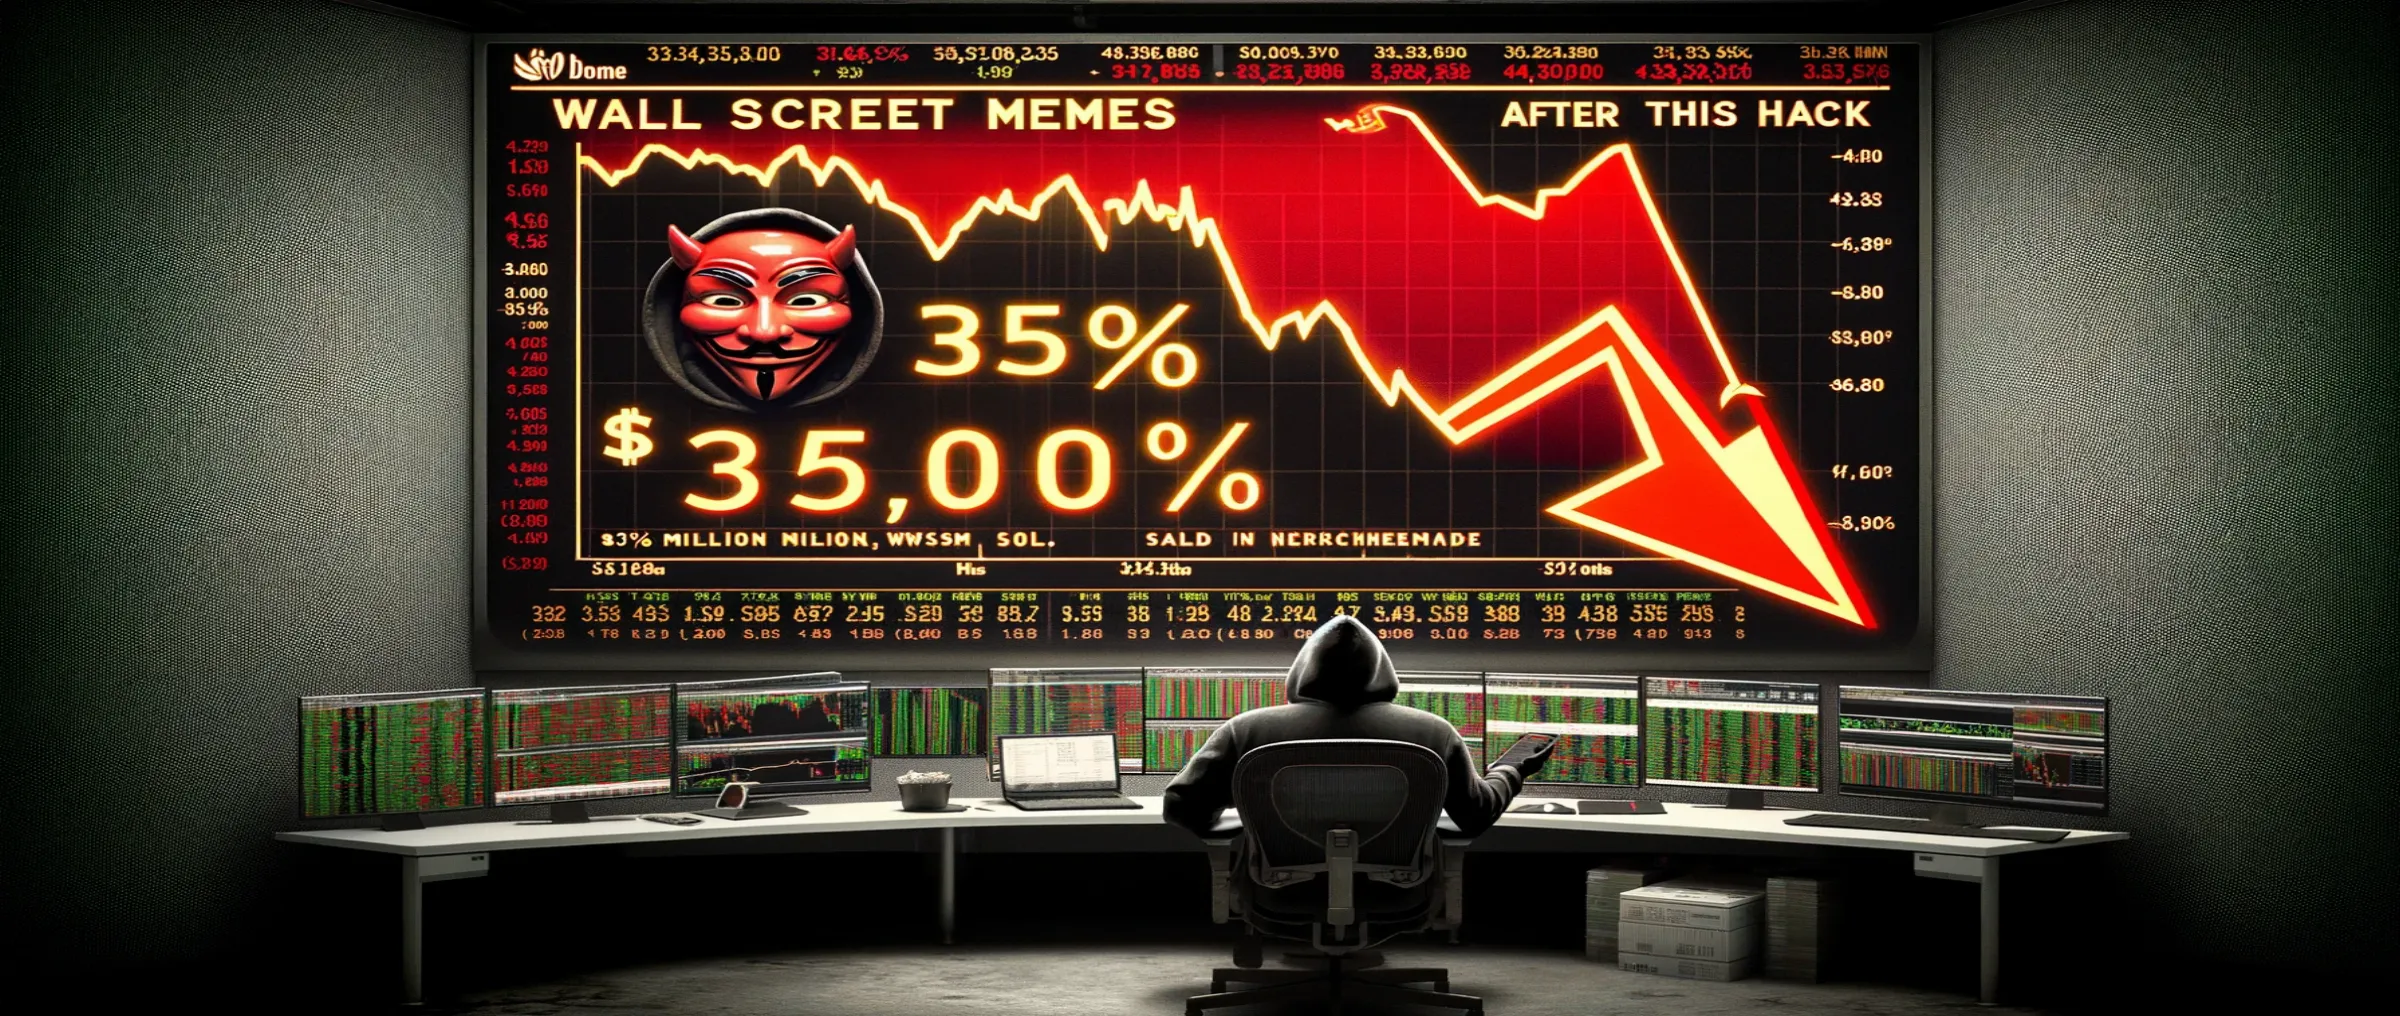 The Wall Street Memes (WSM) price dropped by 35% following a hacker who sold 368 million WSM